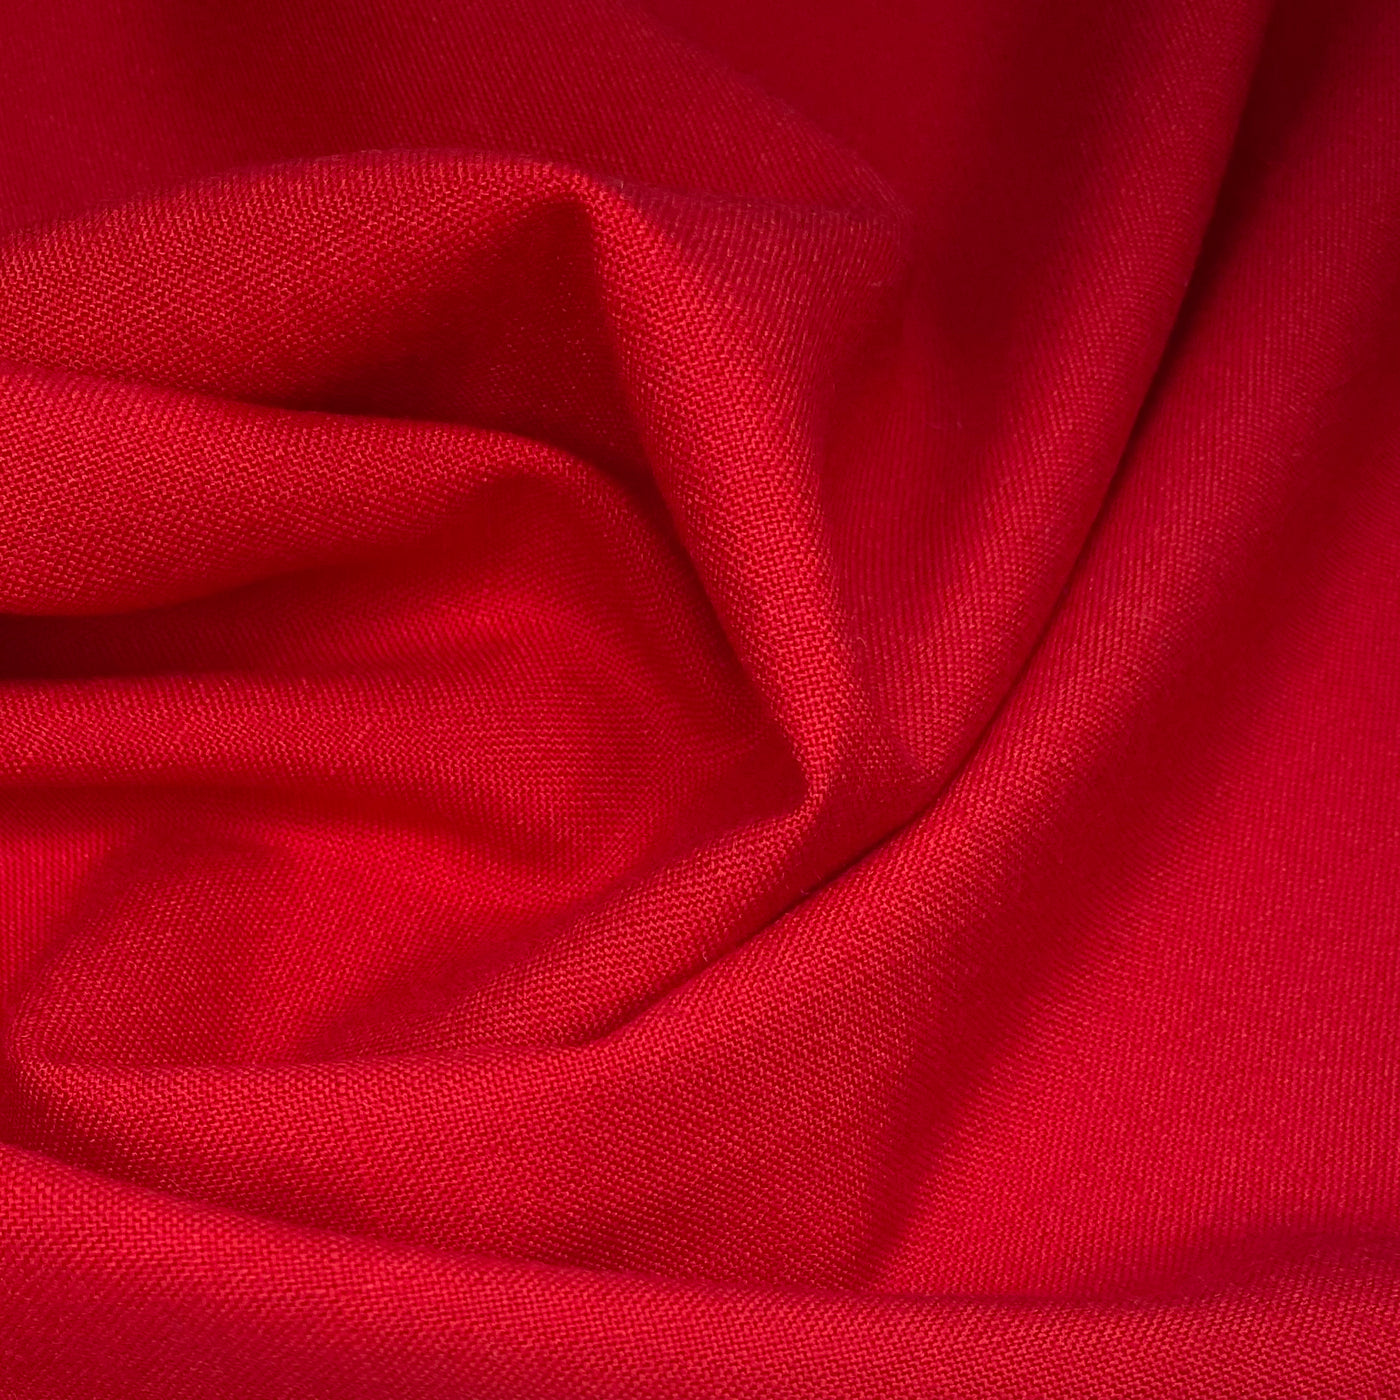 Cotton/Polyester Blend - Linen Look - Red